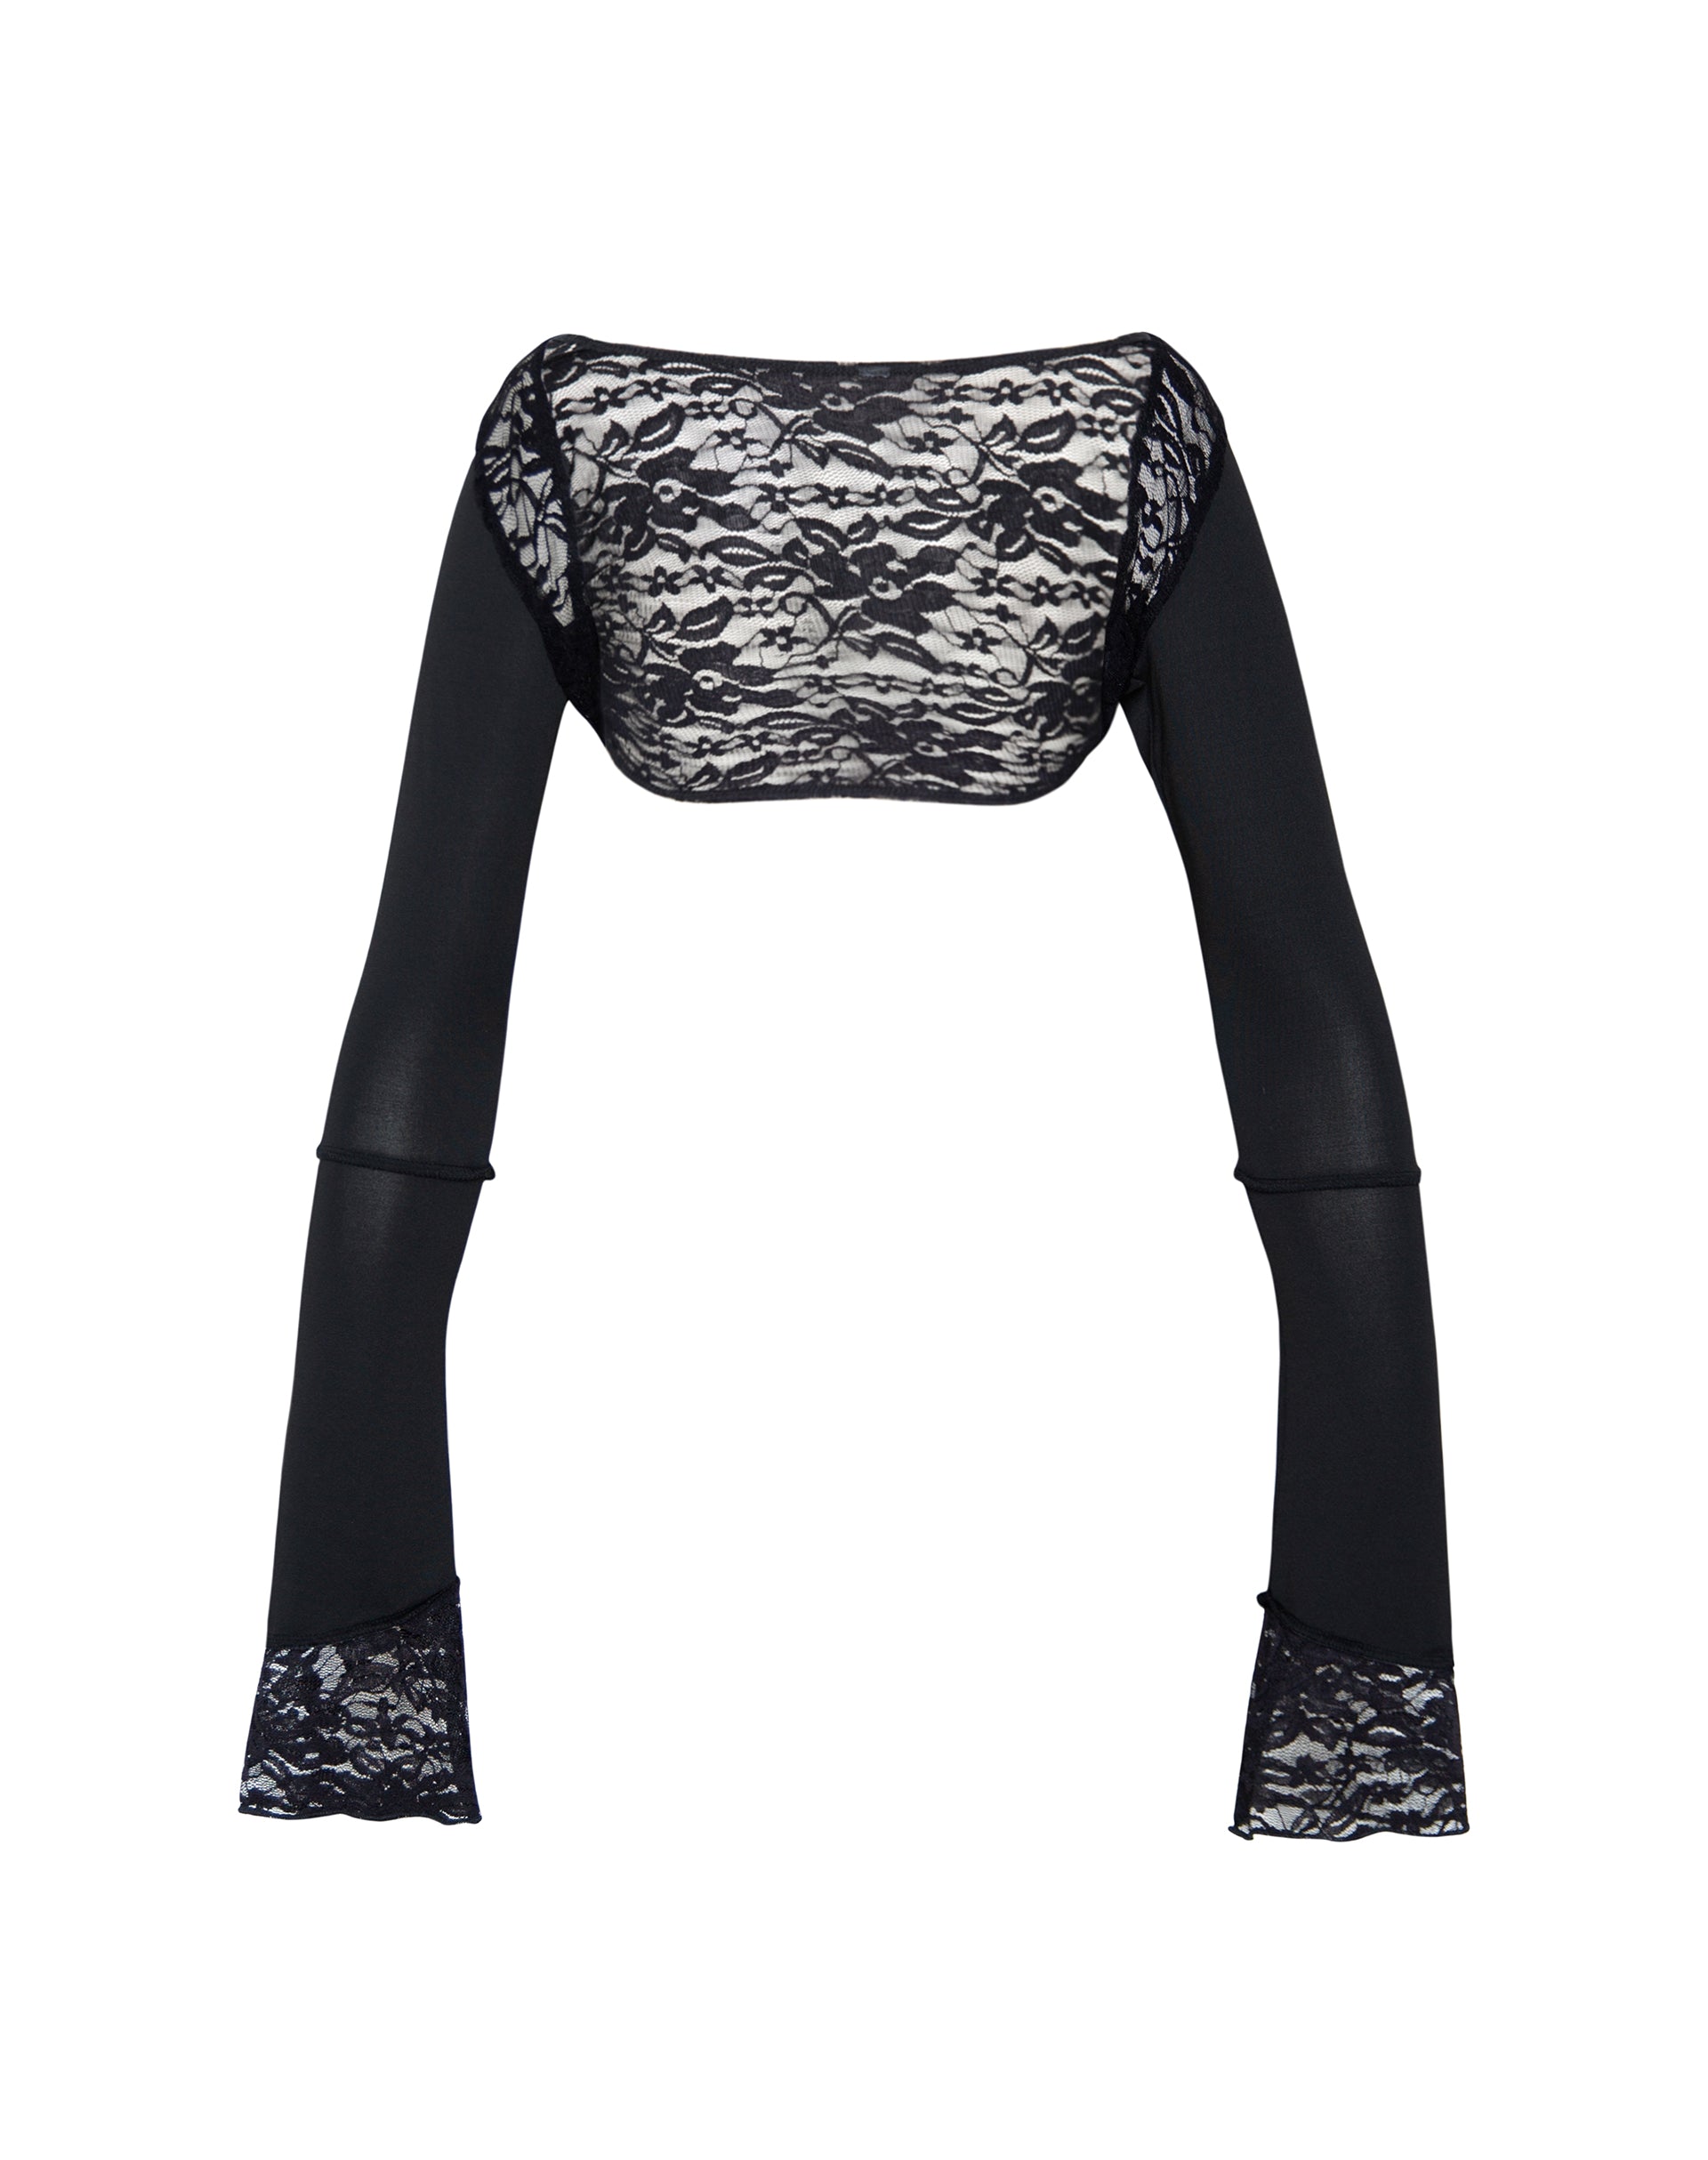 Image of Lenny Lace Shrug Top in Slinky Black with White Lace Trim